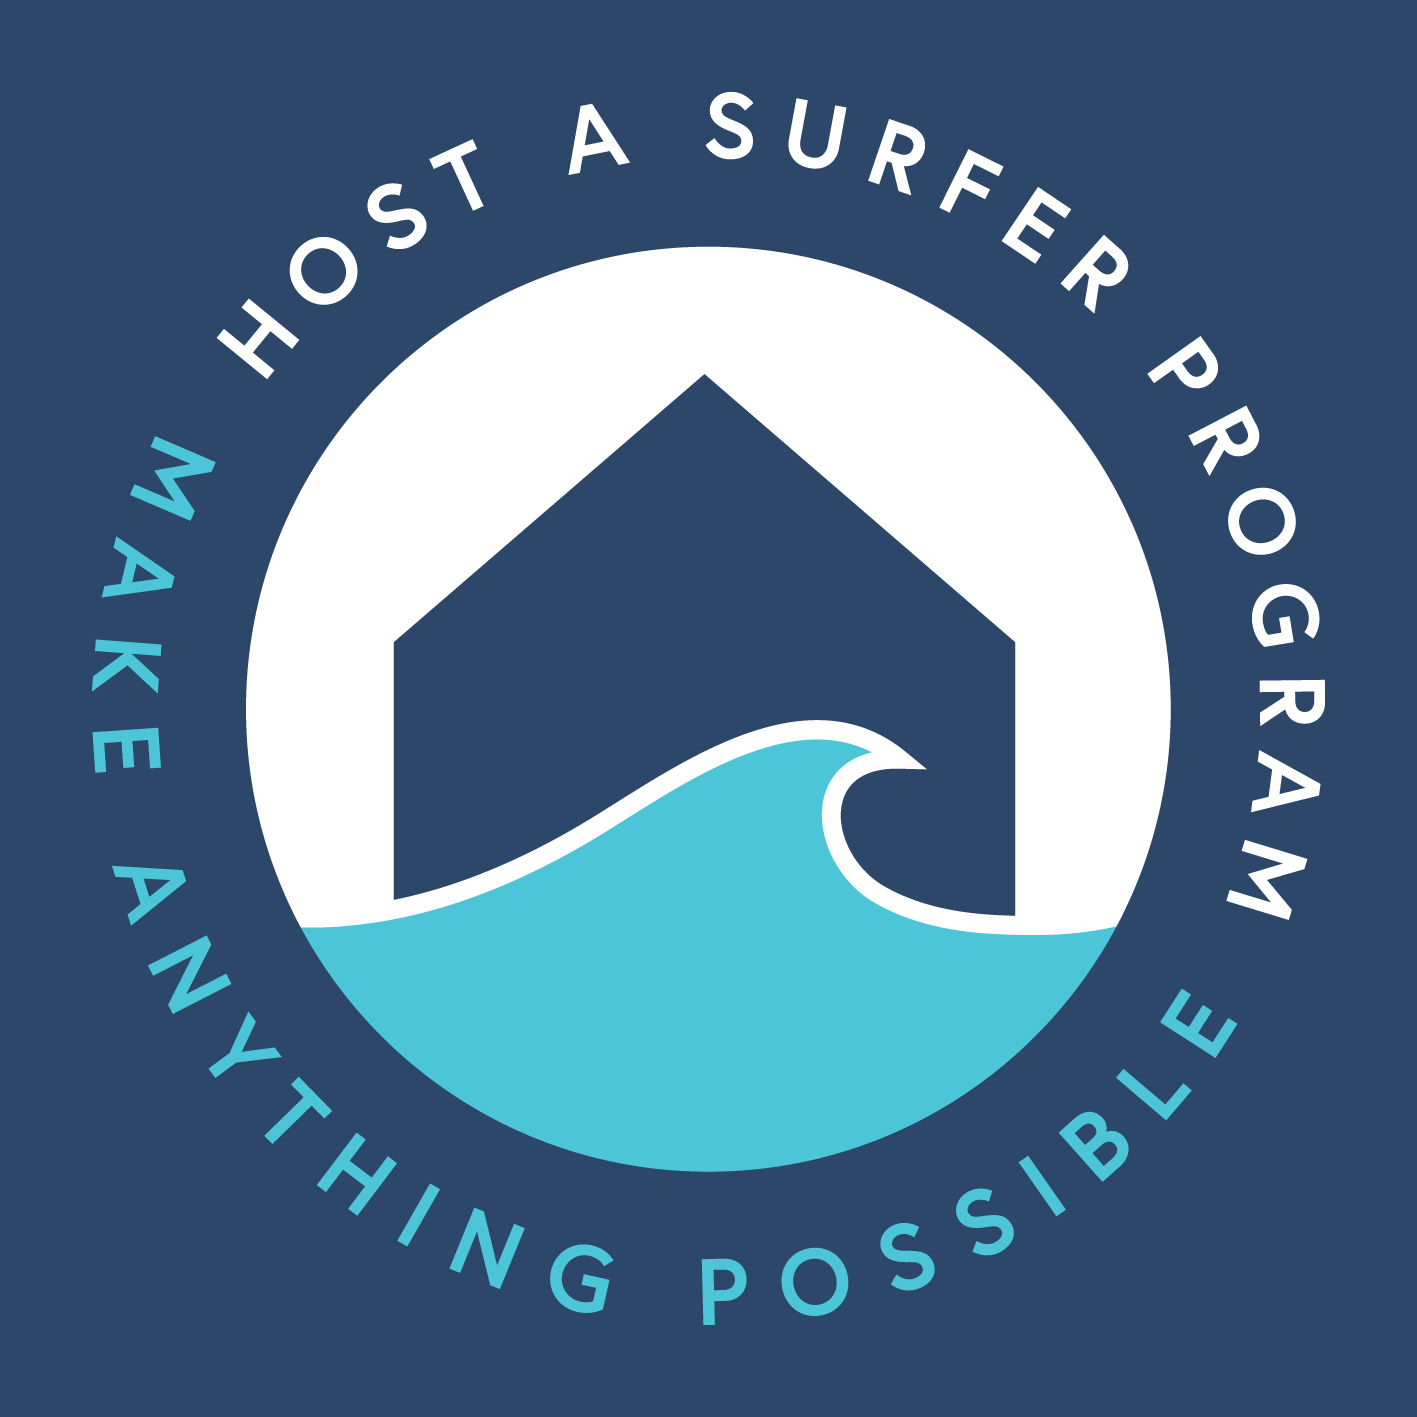 Host a Surfer's Podcast